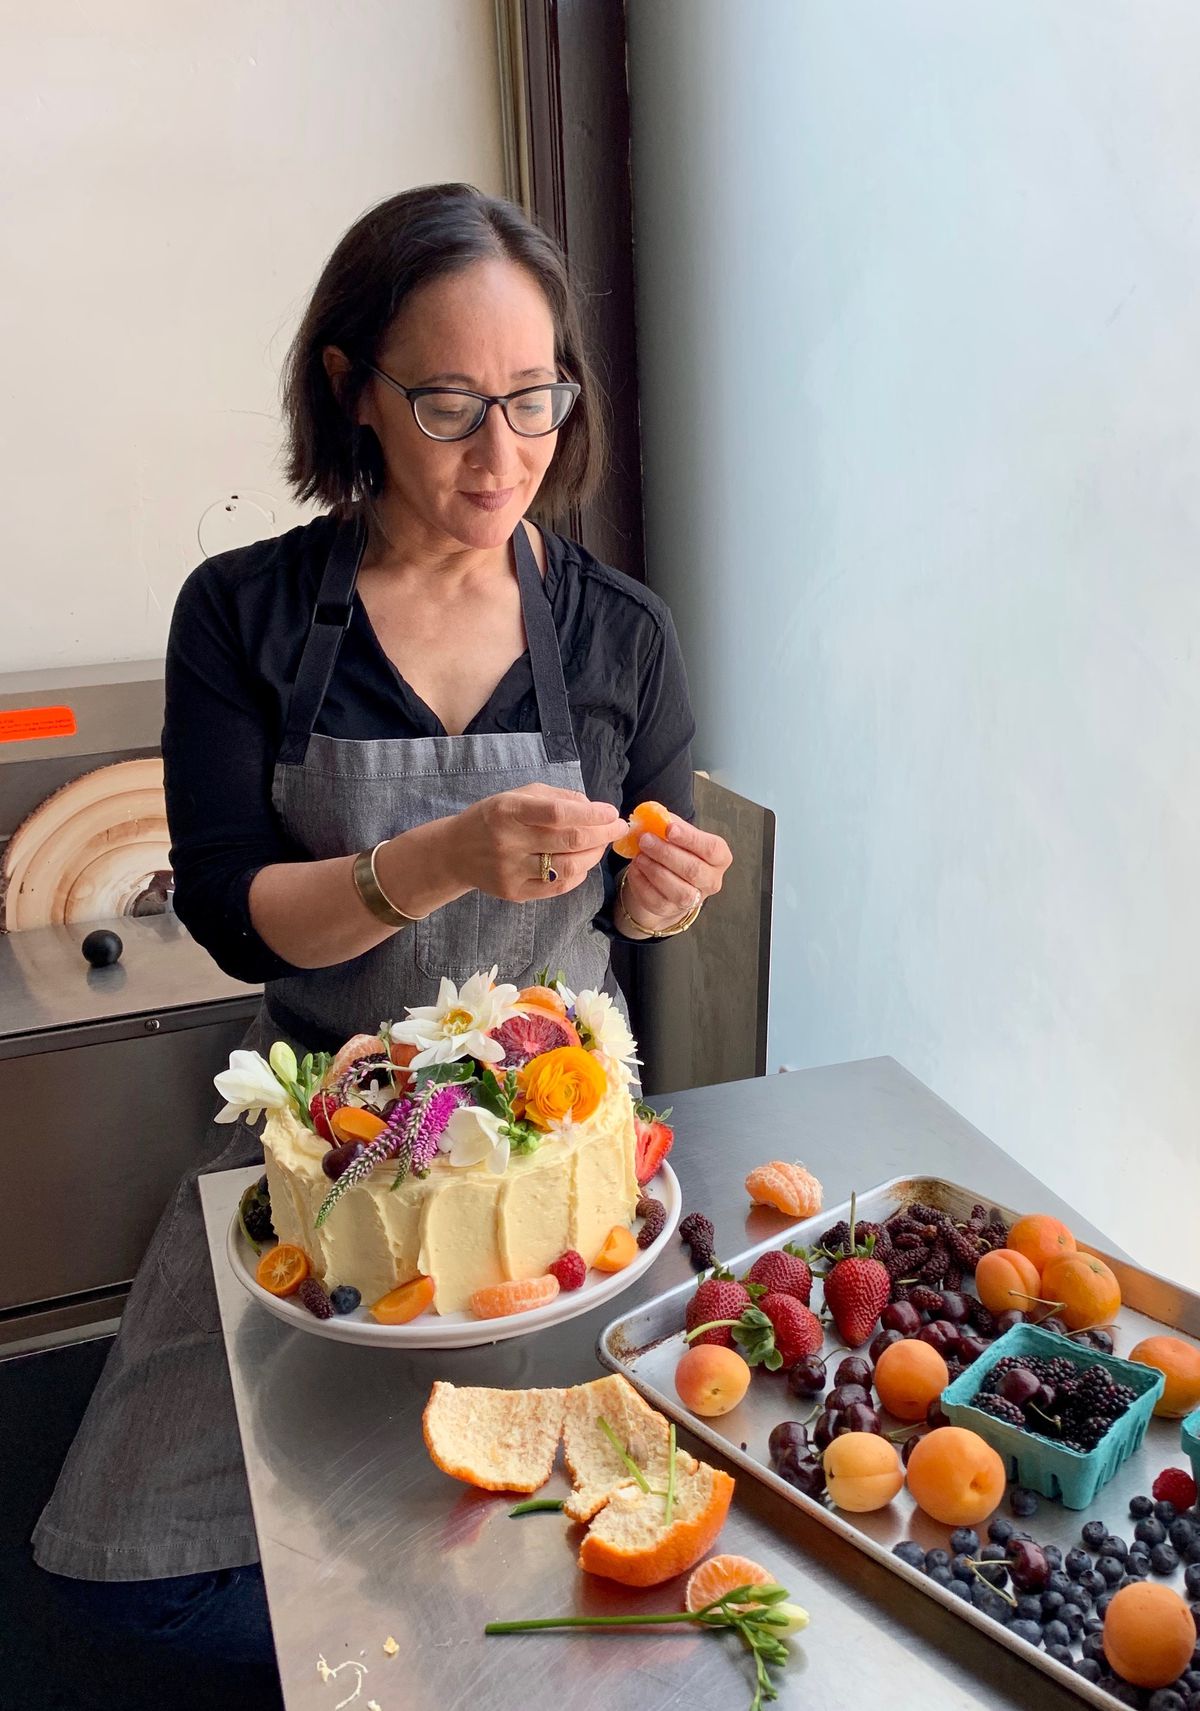 Pastry chef Valerie Gordon garnishes a frosted cake with fruit and fresh flowers.